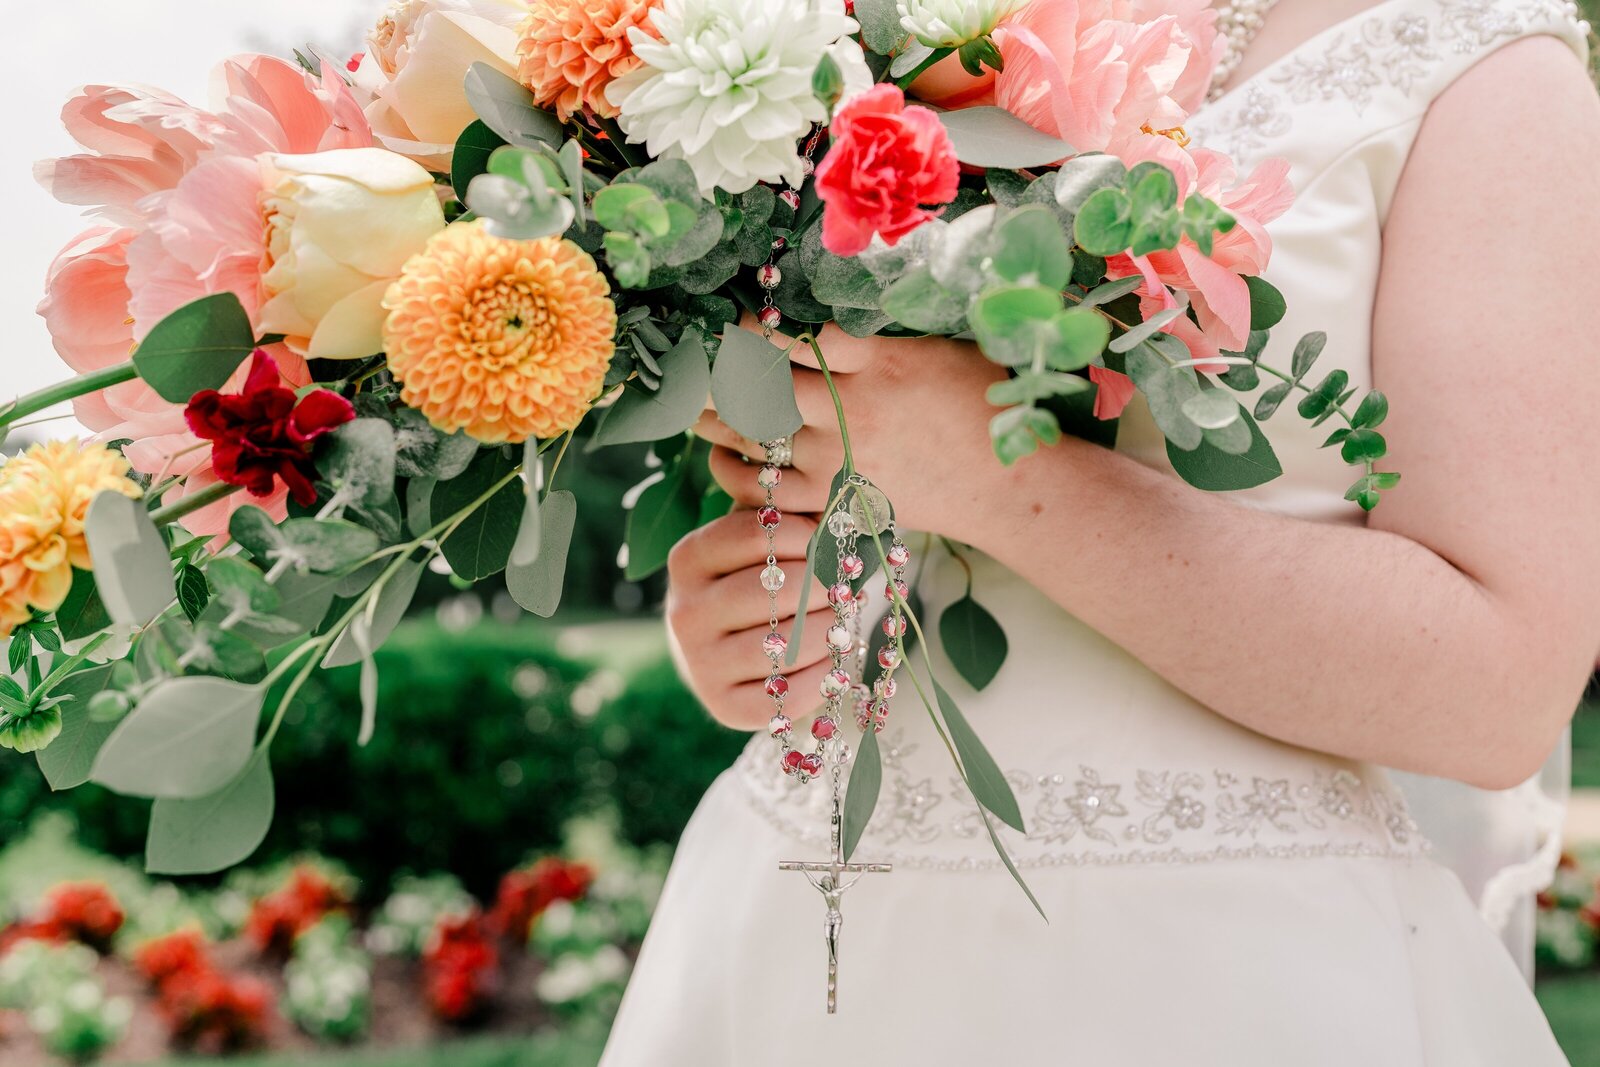 A bride holding her bouquet of colorful flowers with a rosary wrapped around the base during a Catholic wedding in Northern Virginia